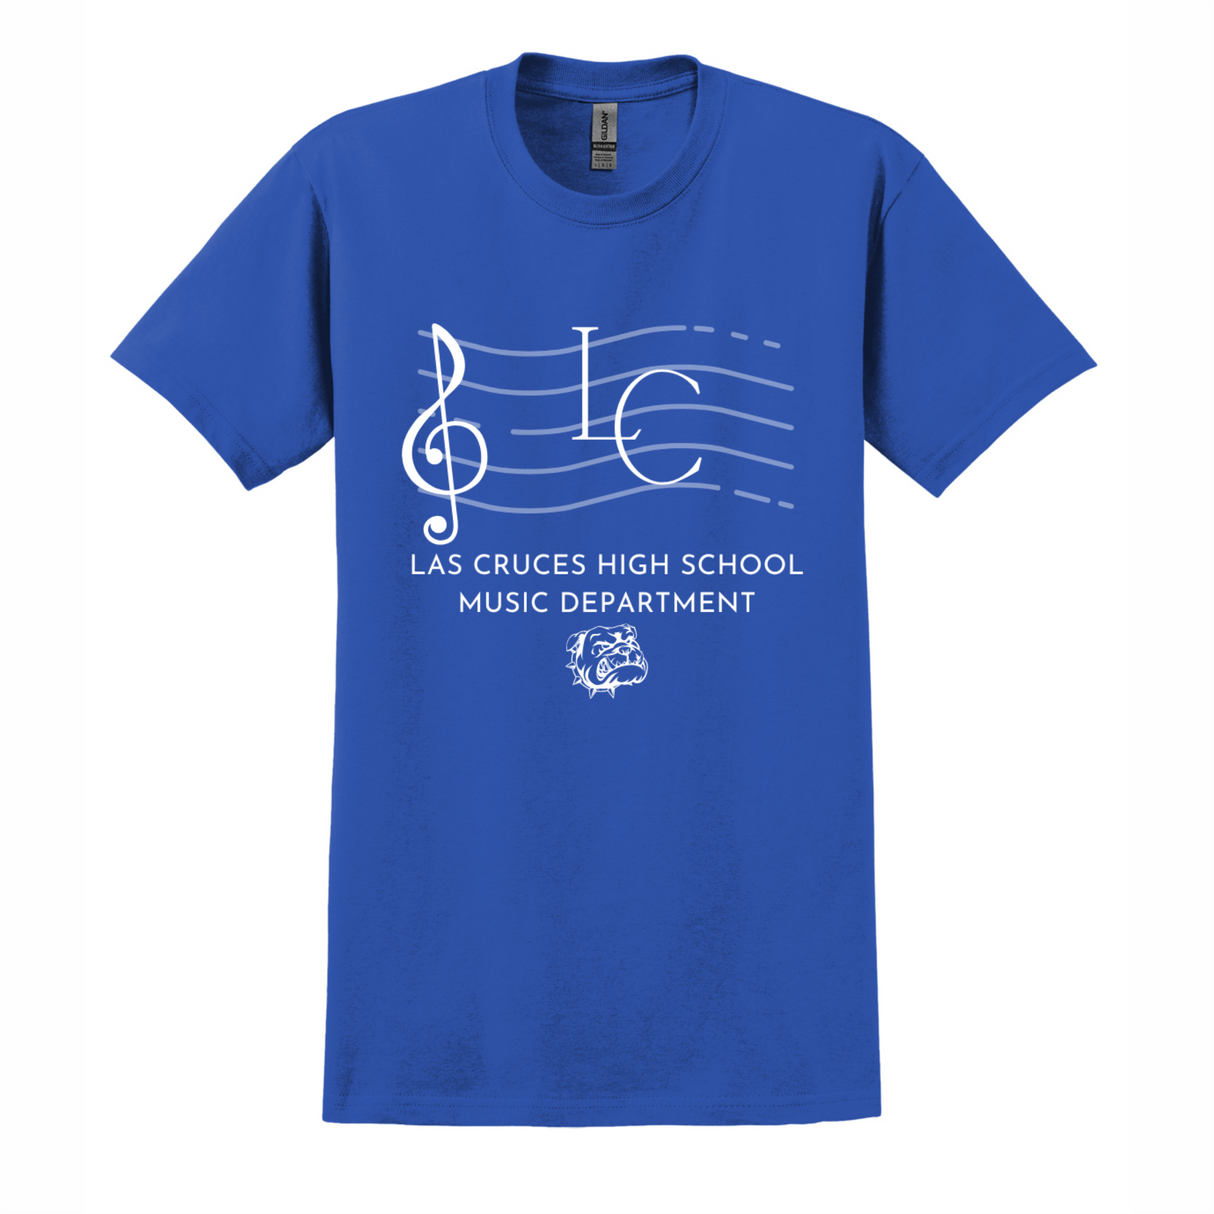 LCHS Band Music Department Cotton Tee